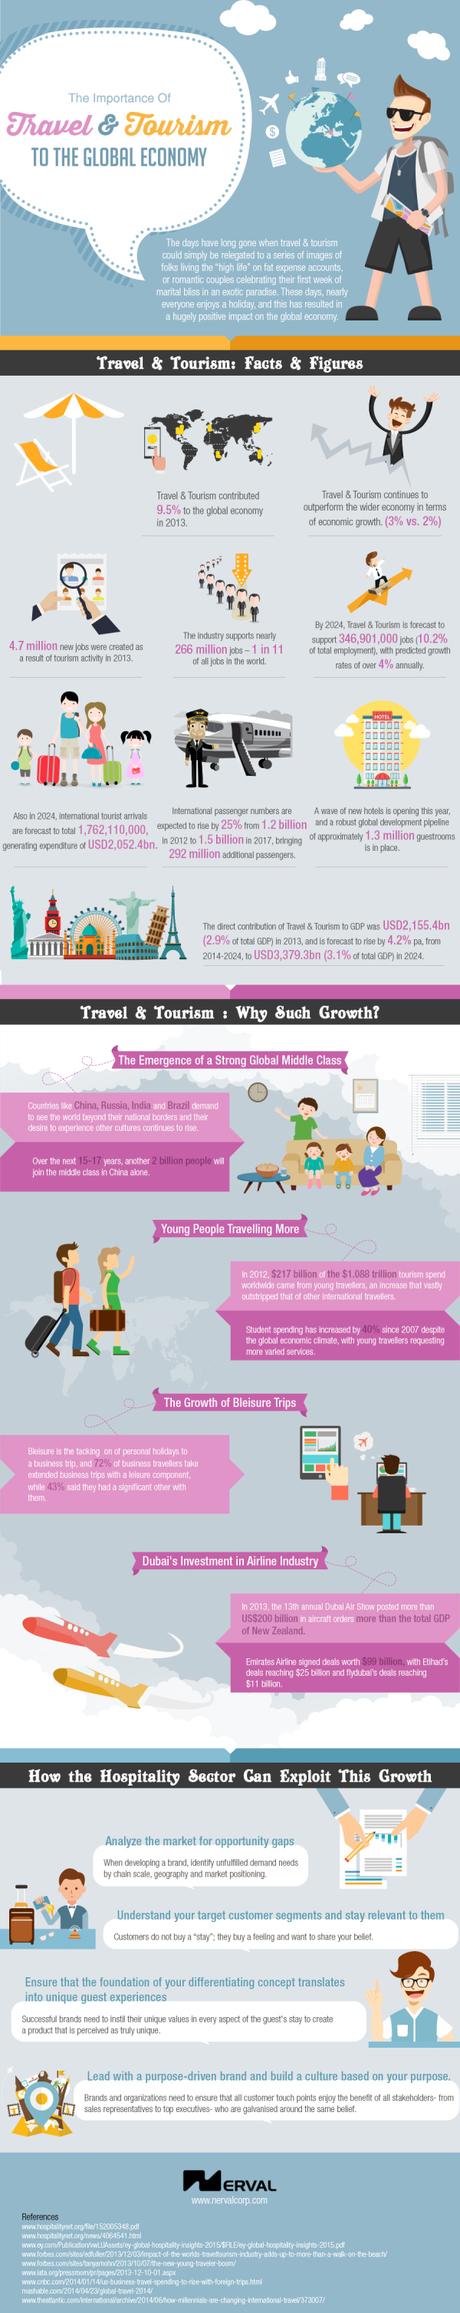 Importance of Travel and Tourism to the Global Economy